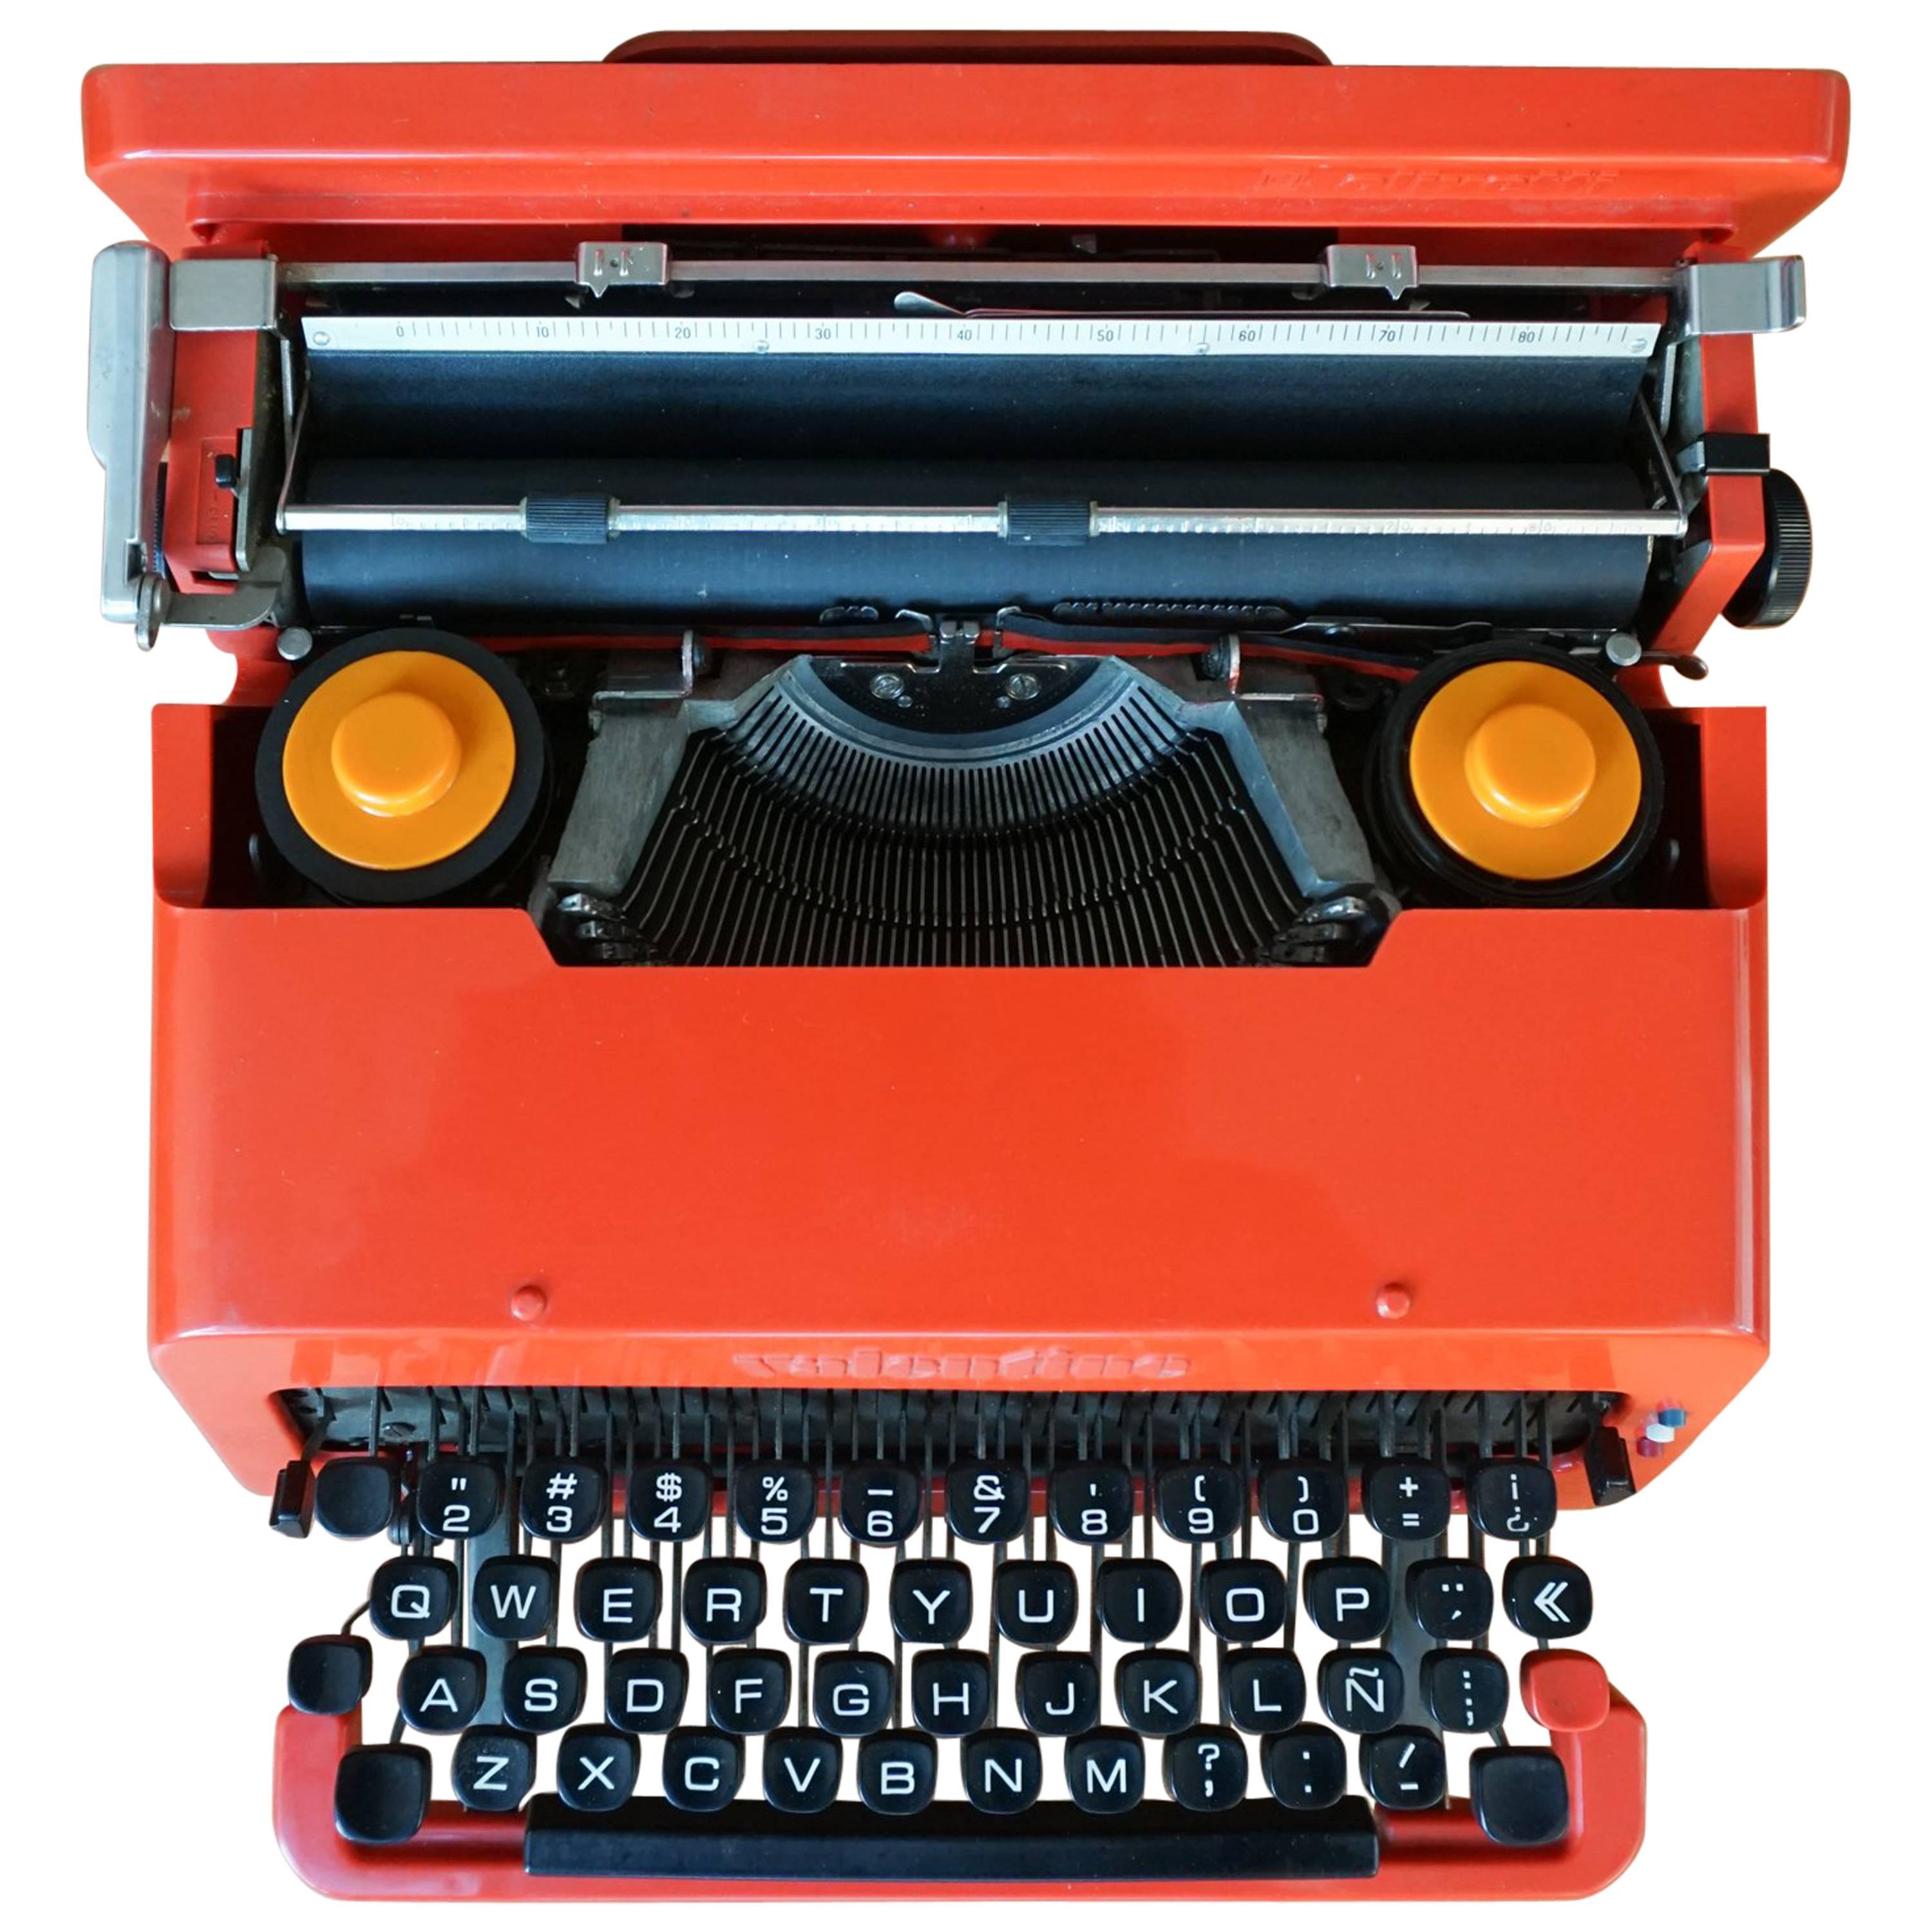 Olivetti Valentine Typewriter by Ettore Sottsass Jr. and Perry King, 1968